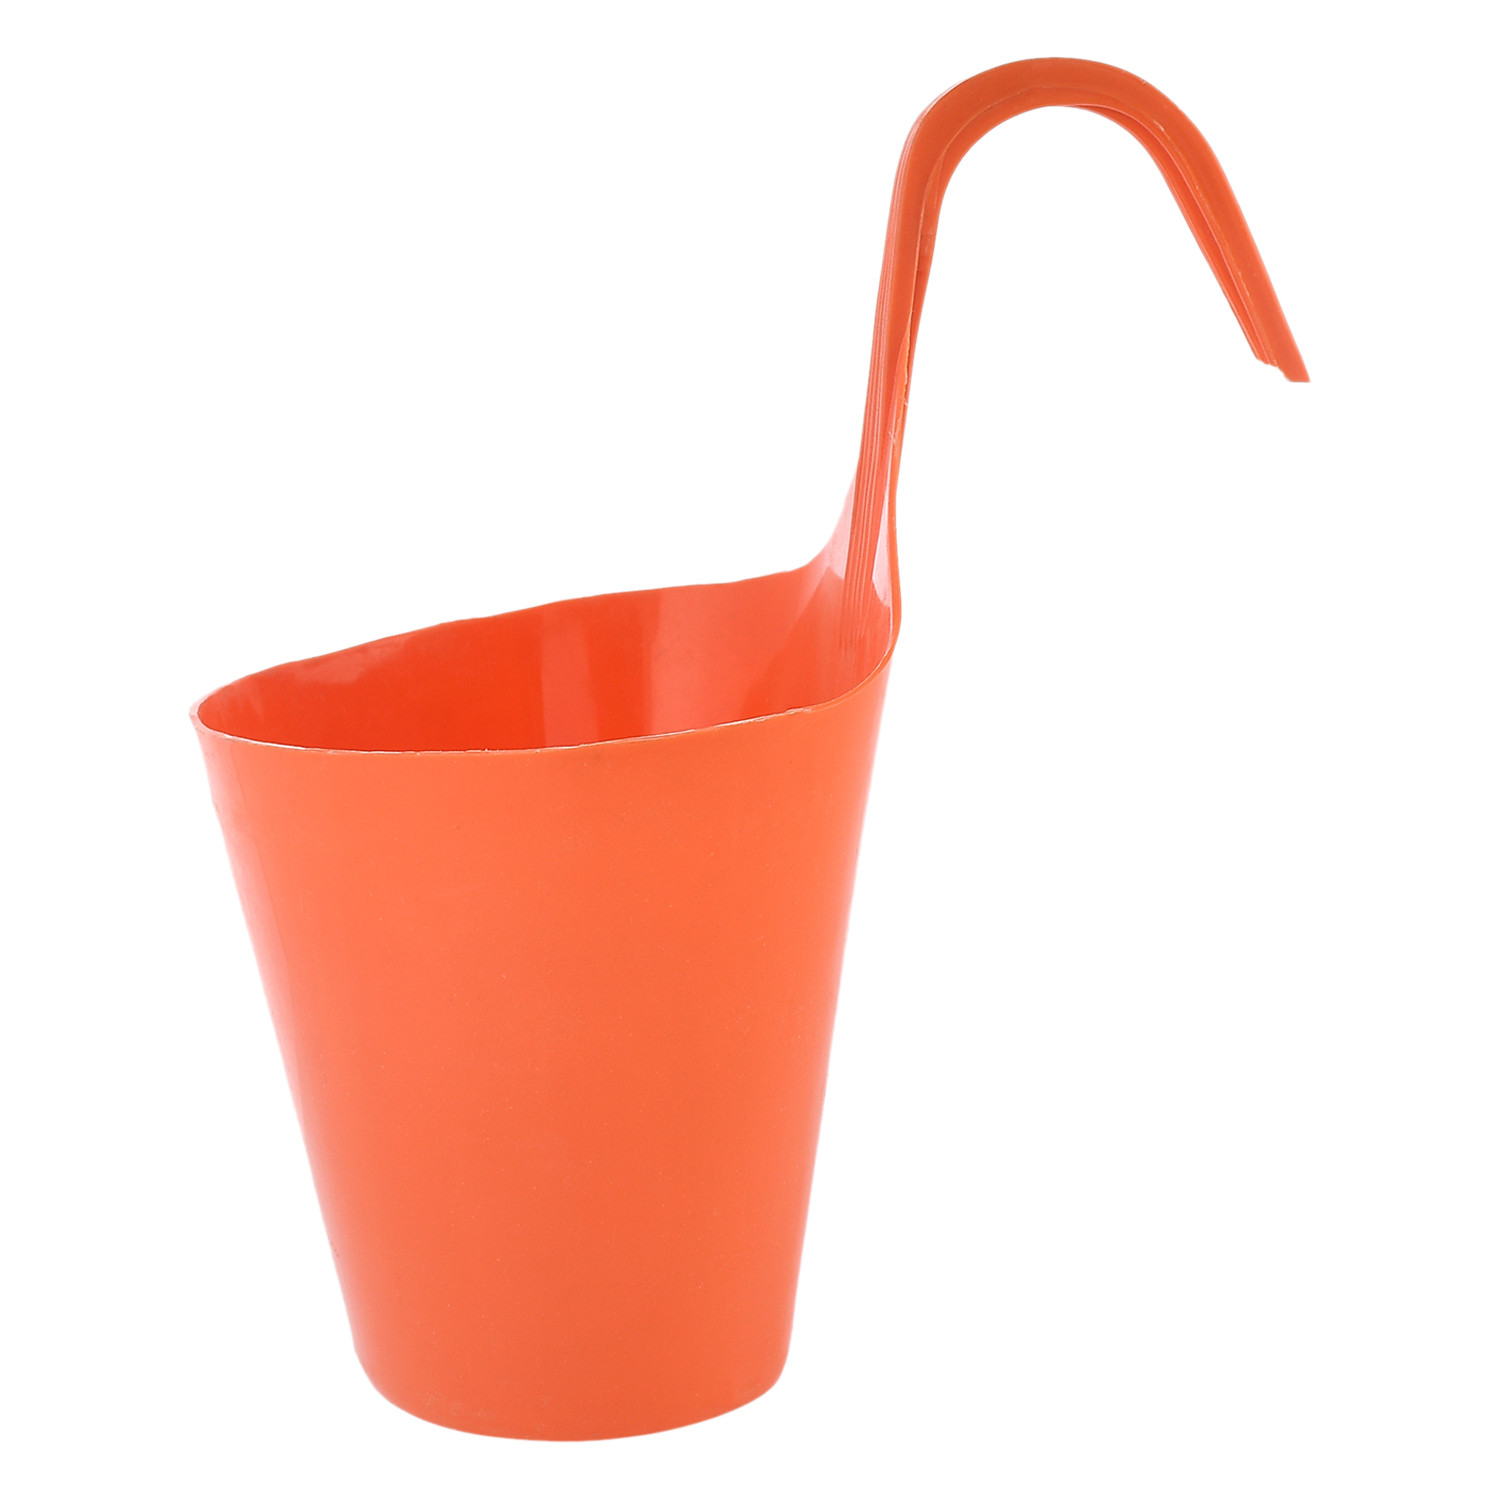 Kuber Industries Hanging Flower Pot|Single Hook Plant Container|Durable Plastic Glossy Finish Pots for Home|Balcony|Garden|9 Inch|Pack of 4 (Multicolor)